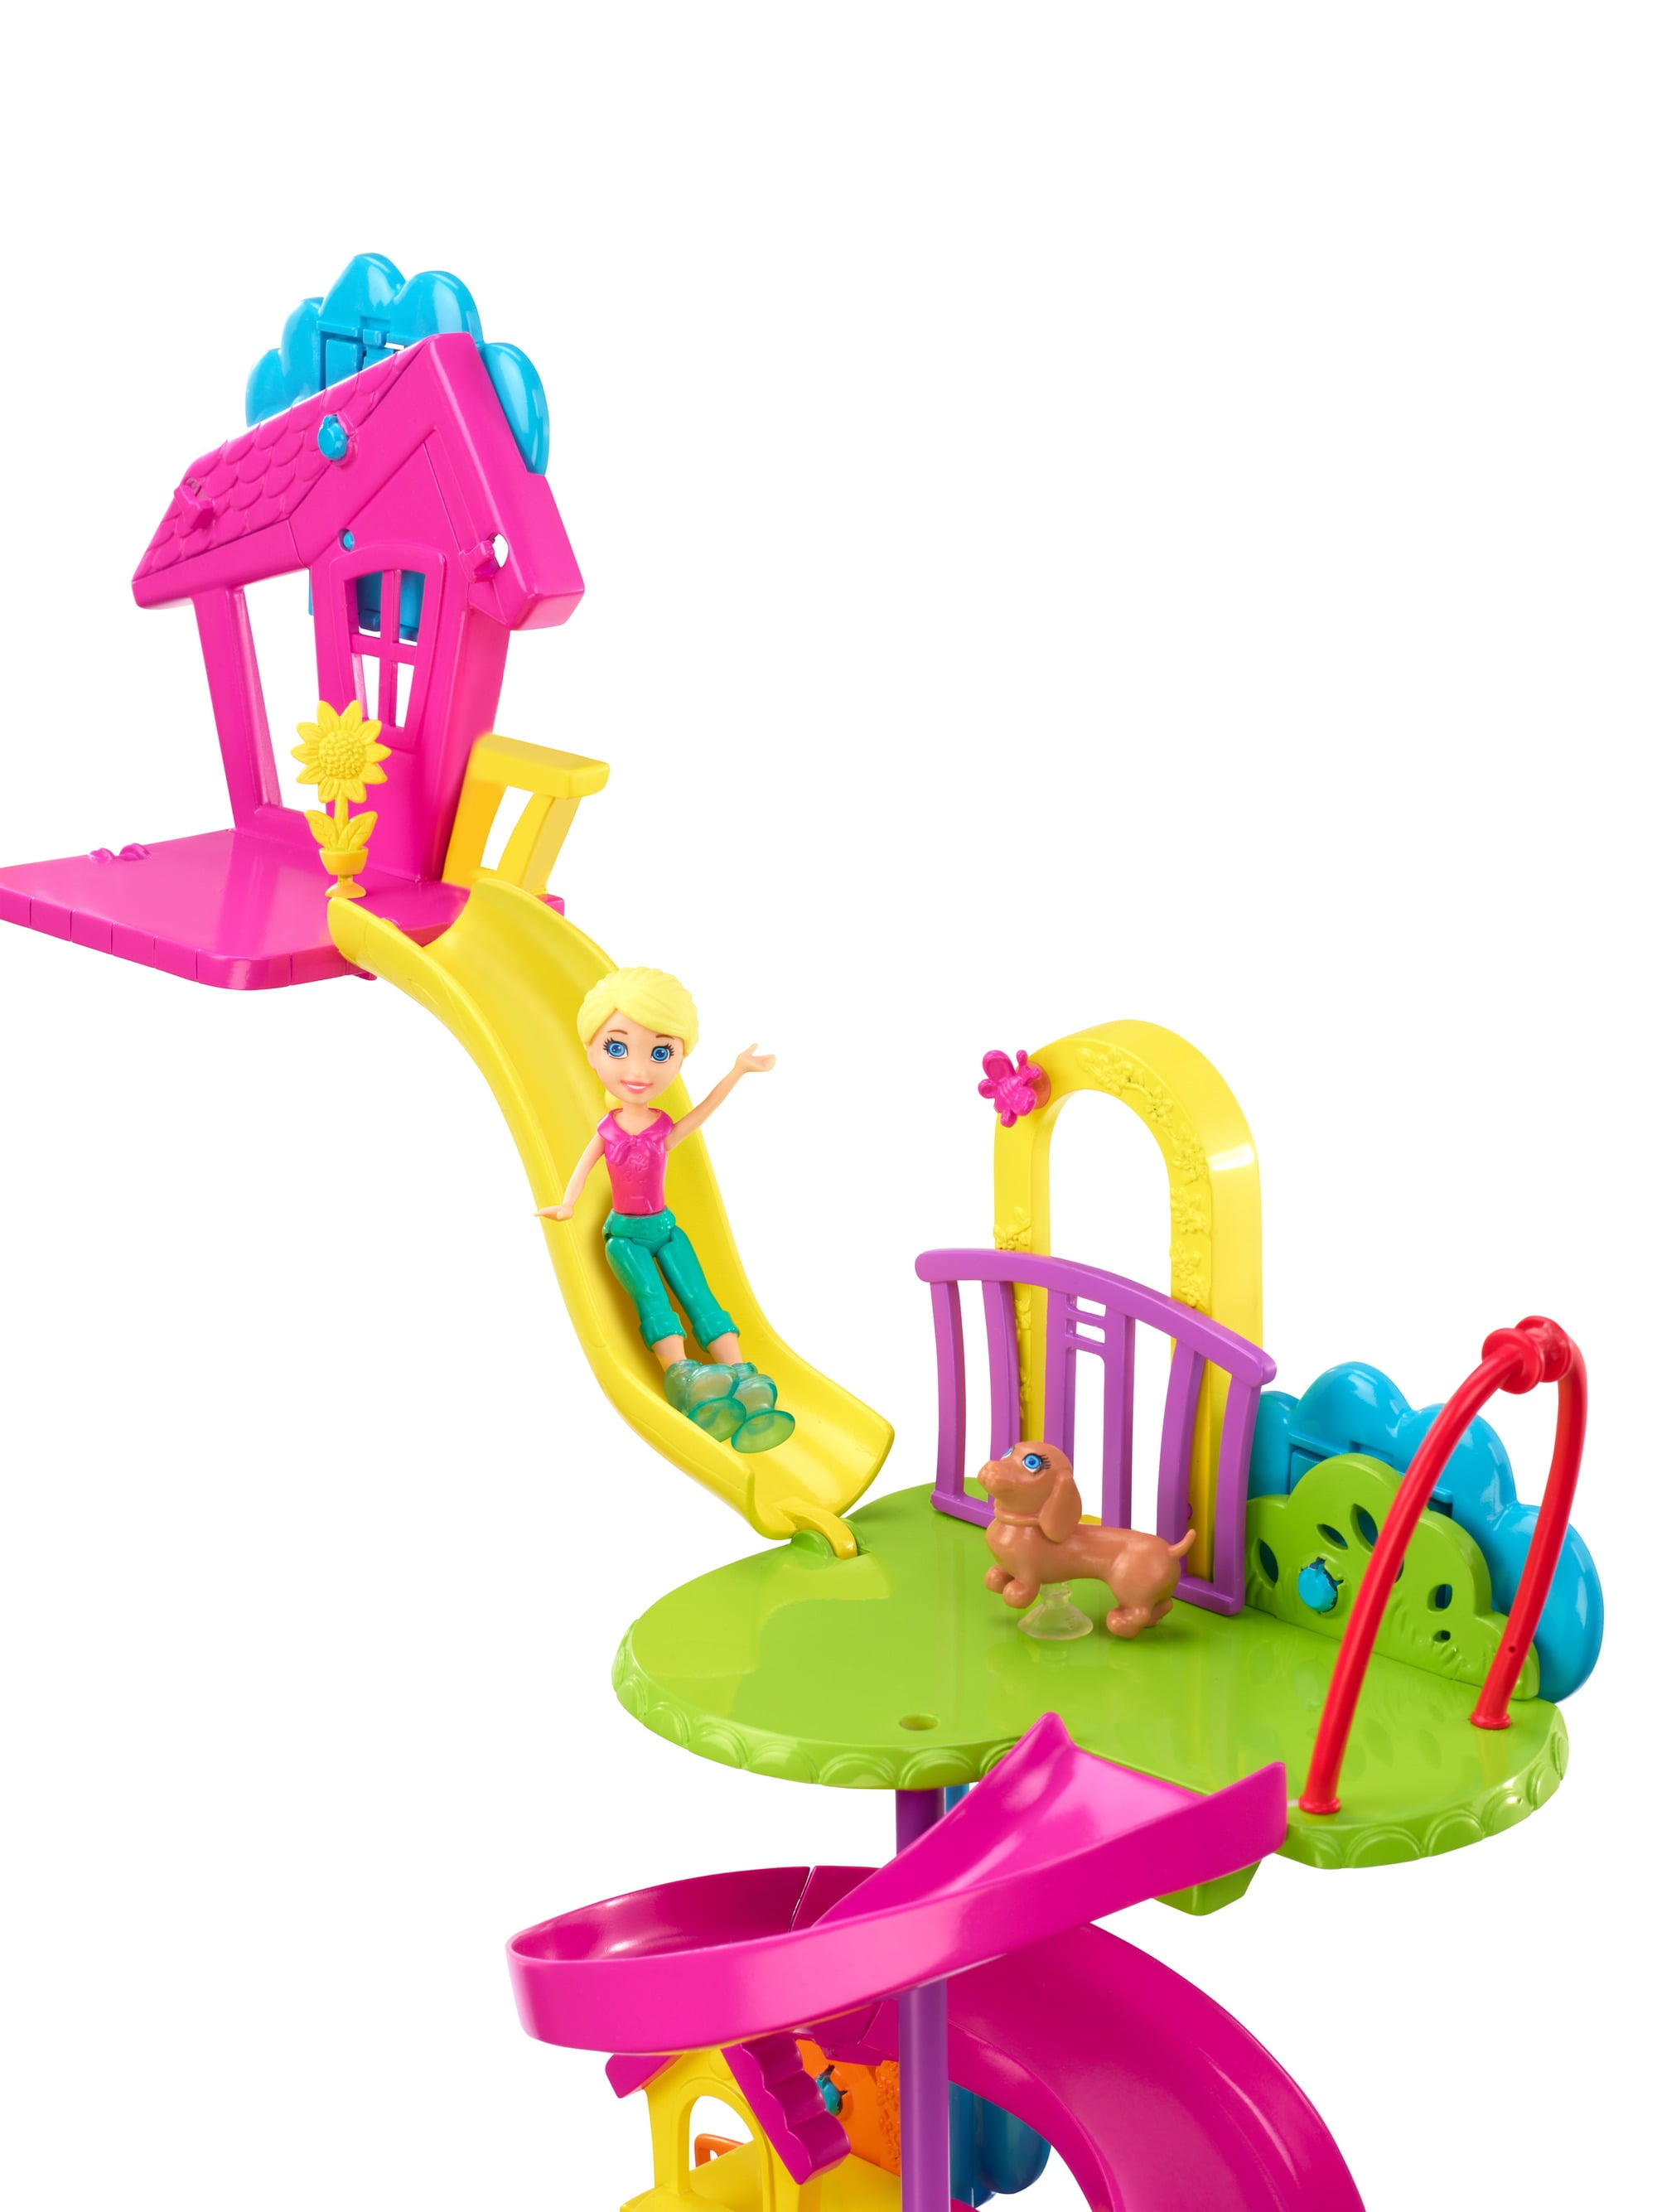 Polly Pocket Wall Party Polly Plaza Mall Playset Set Safe for Wall Play HTF